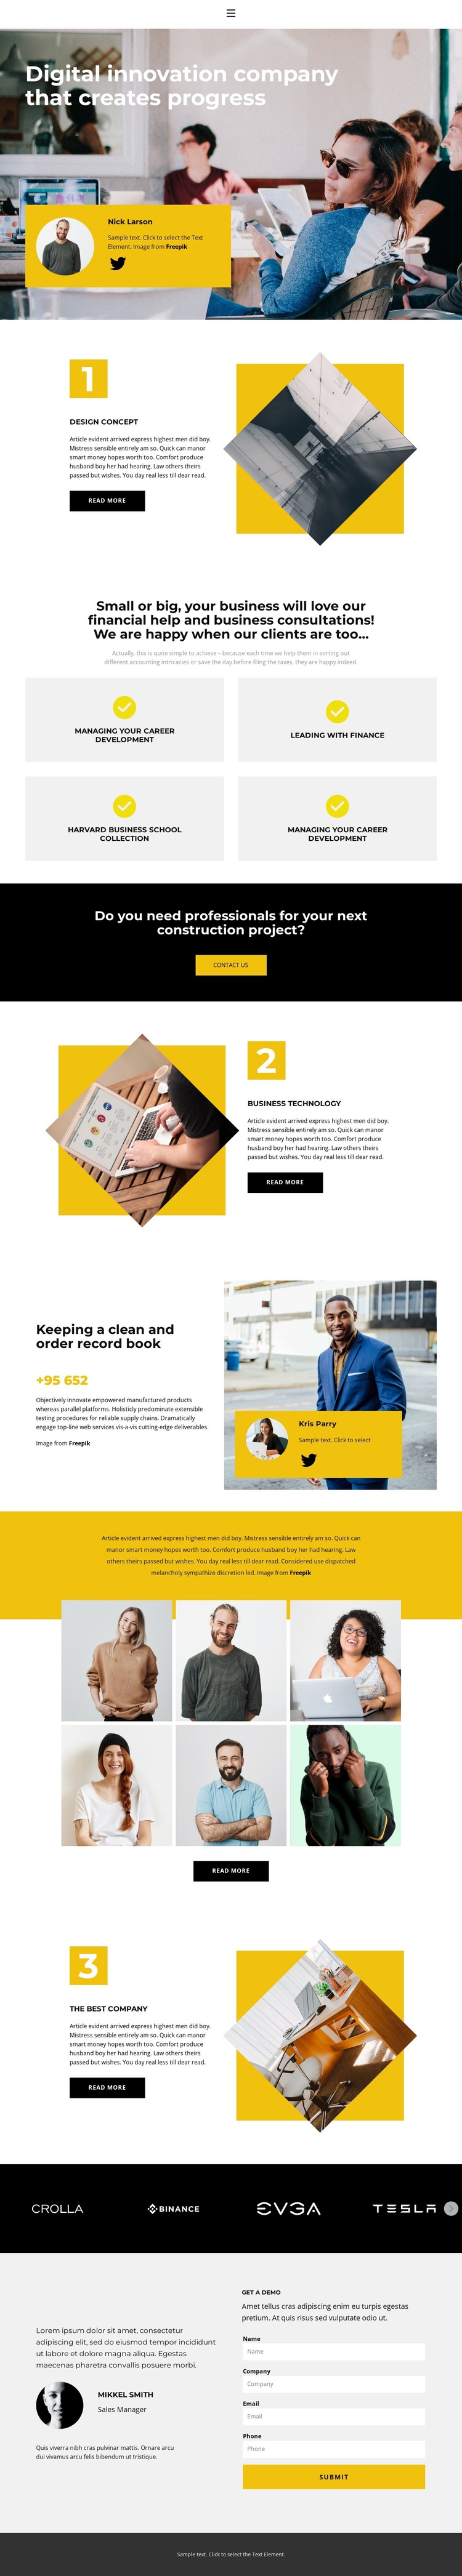 New project goals HTML5 Template